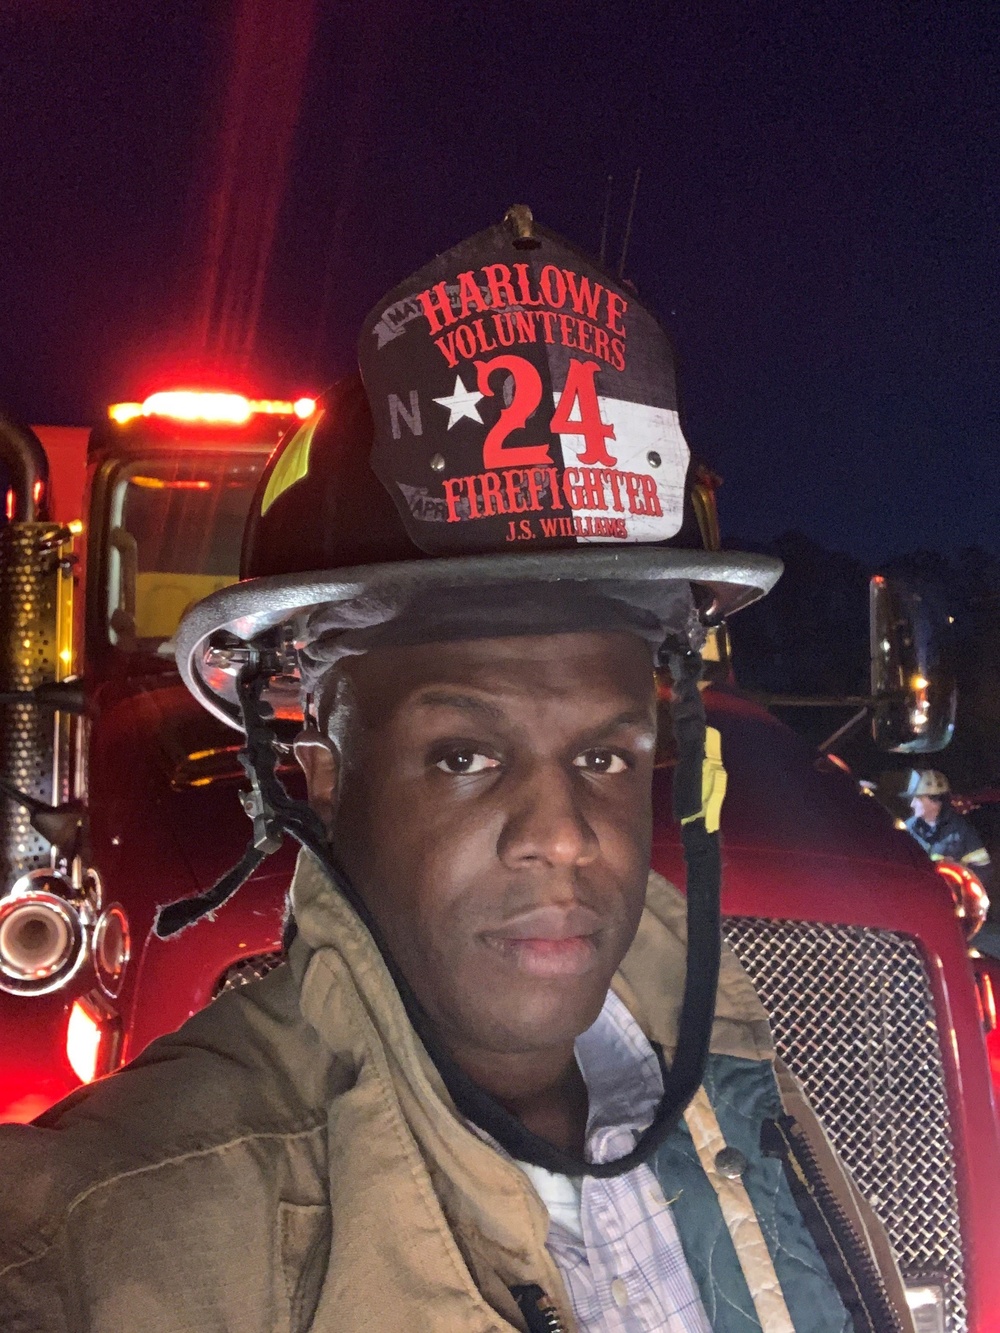 Cherry Point Sailor Serves local Community as Corpsman, Volunteer Firefighter